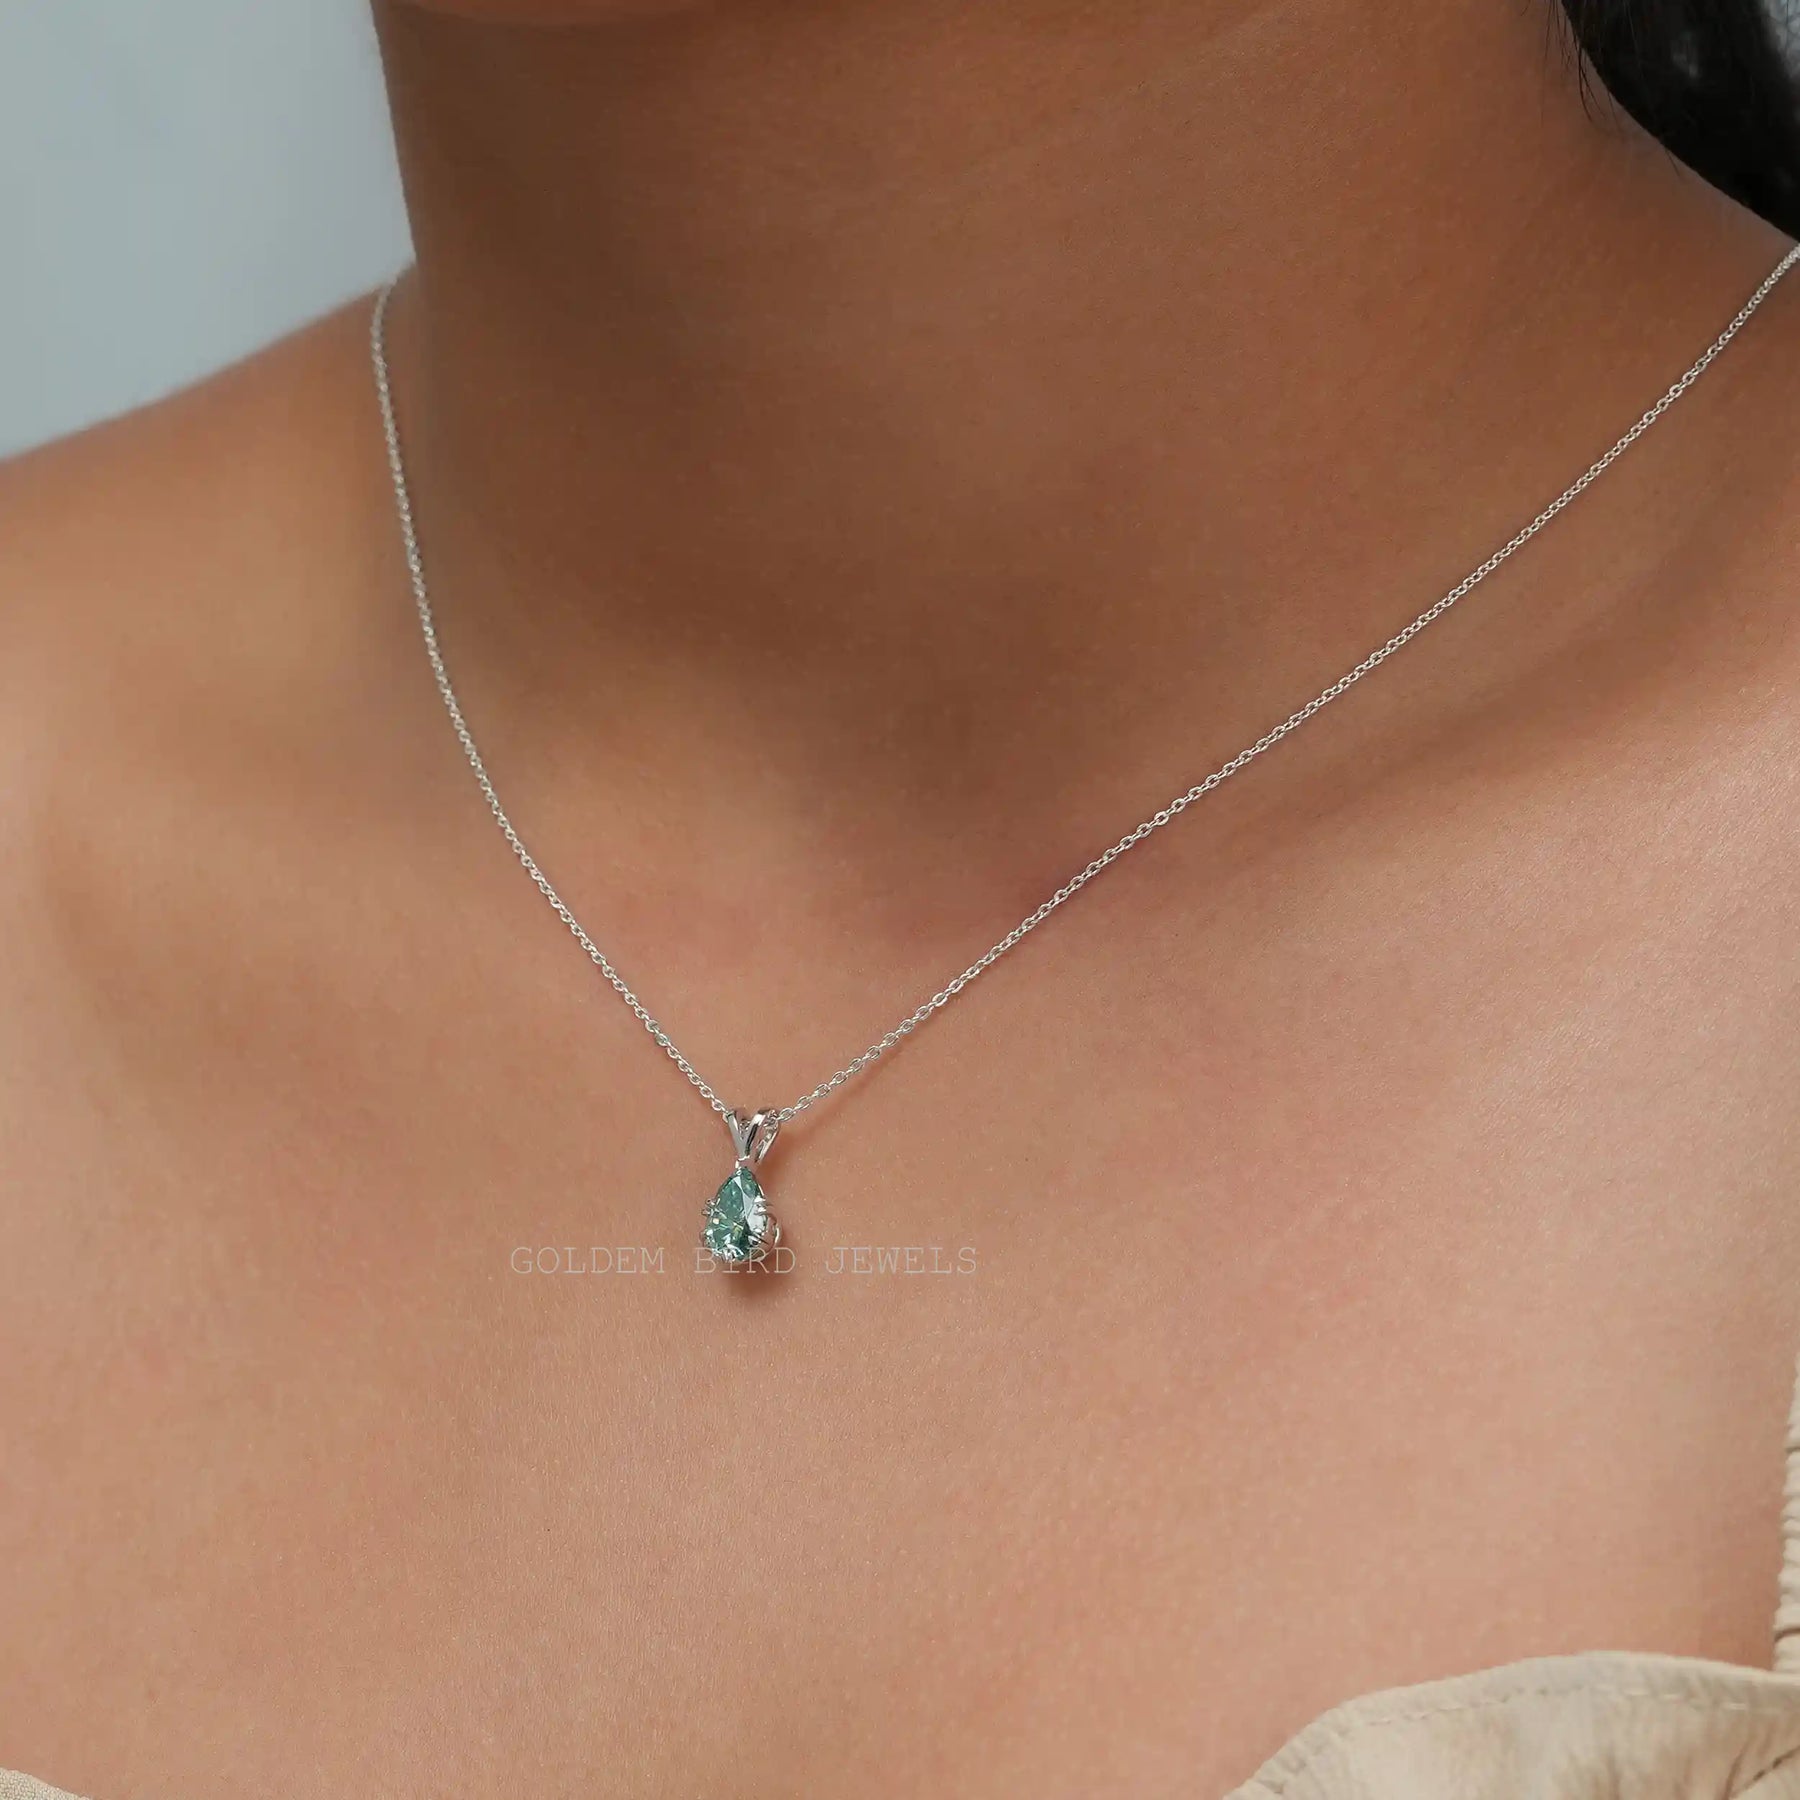 [In neck front view of moissanite blue pear cut pendant in 14k white gold]-[Golden Bird Jewels]